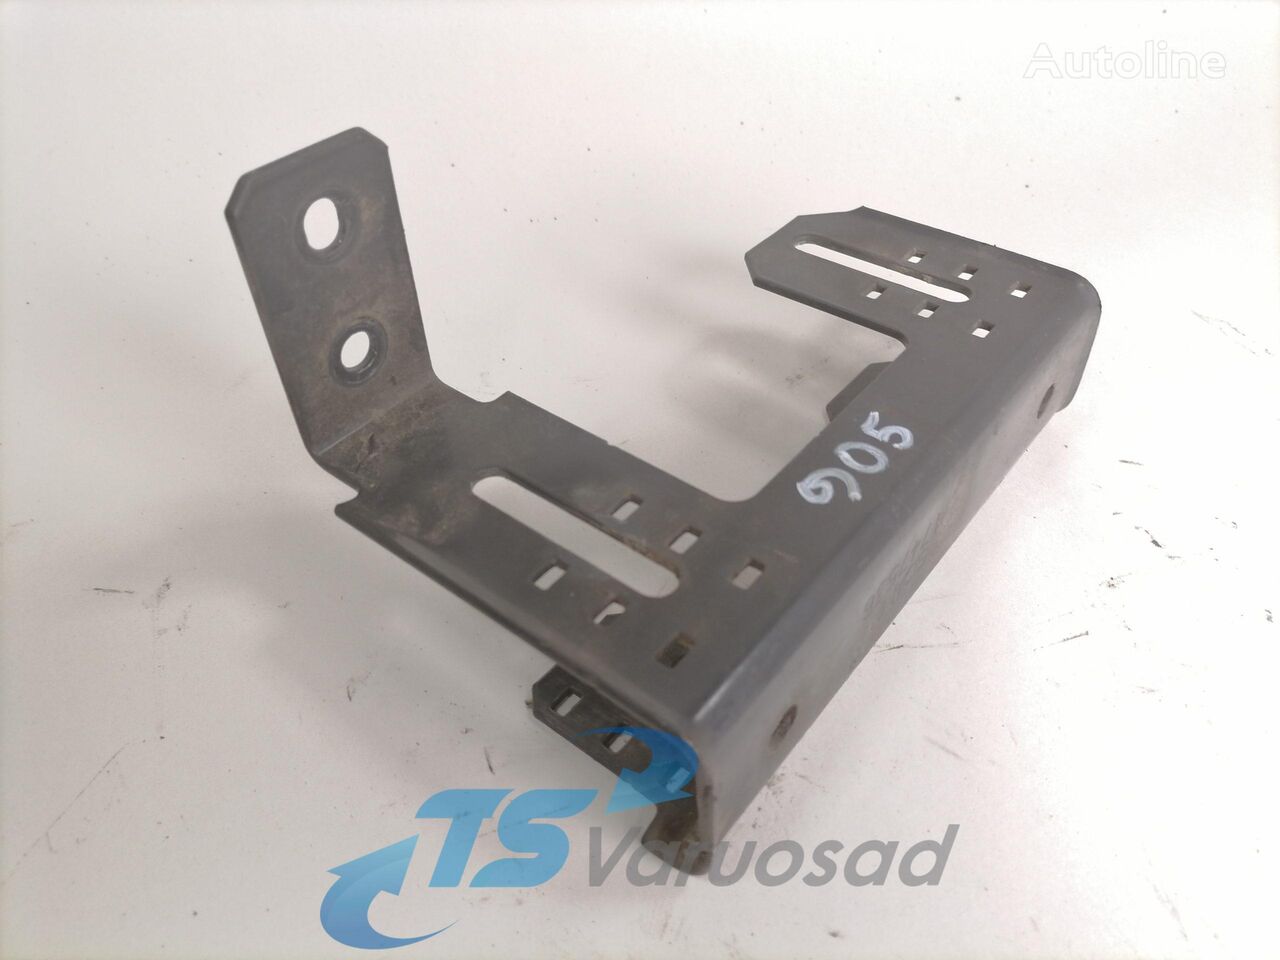 Scania Bracket 1747536 for Scania R420 truck tractor